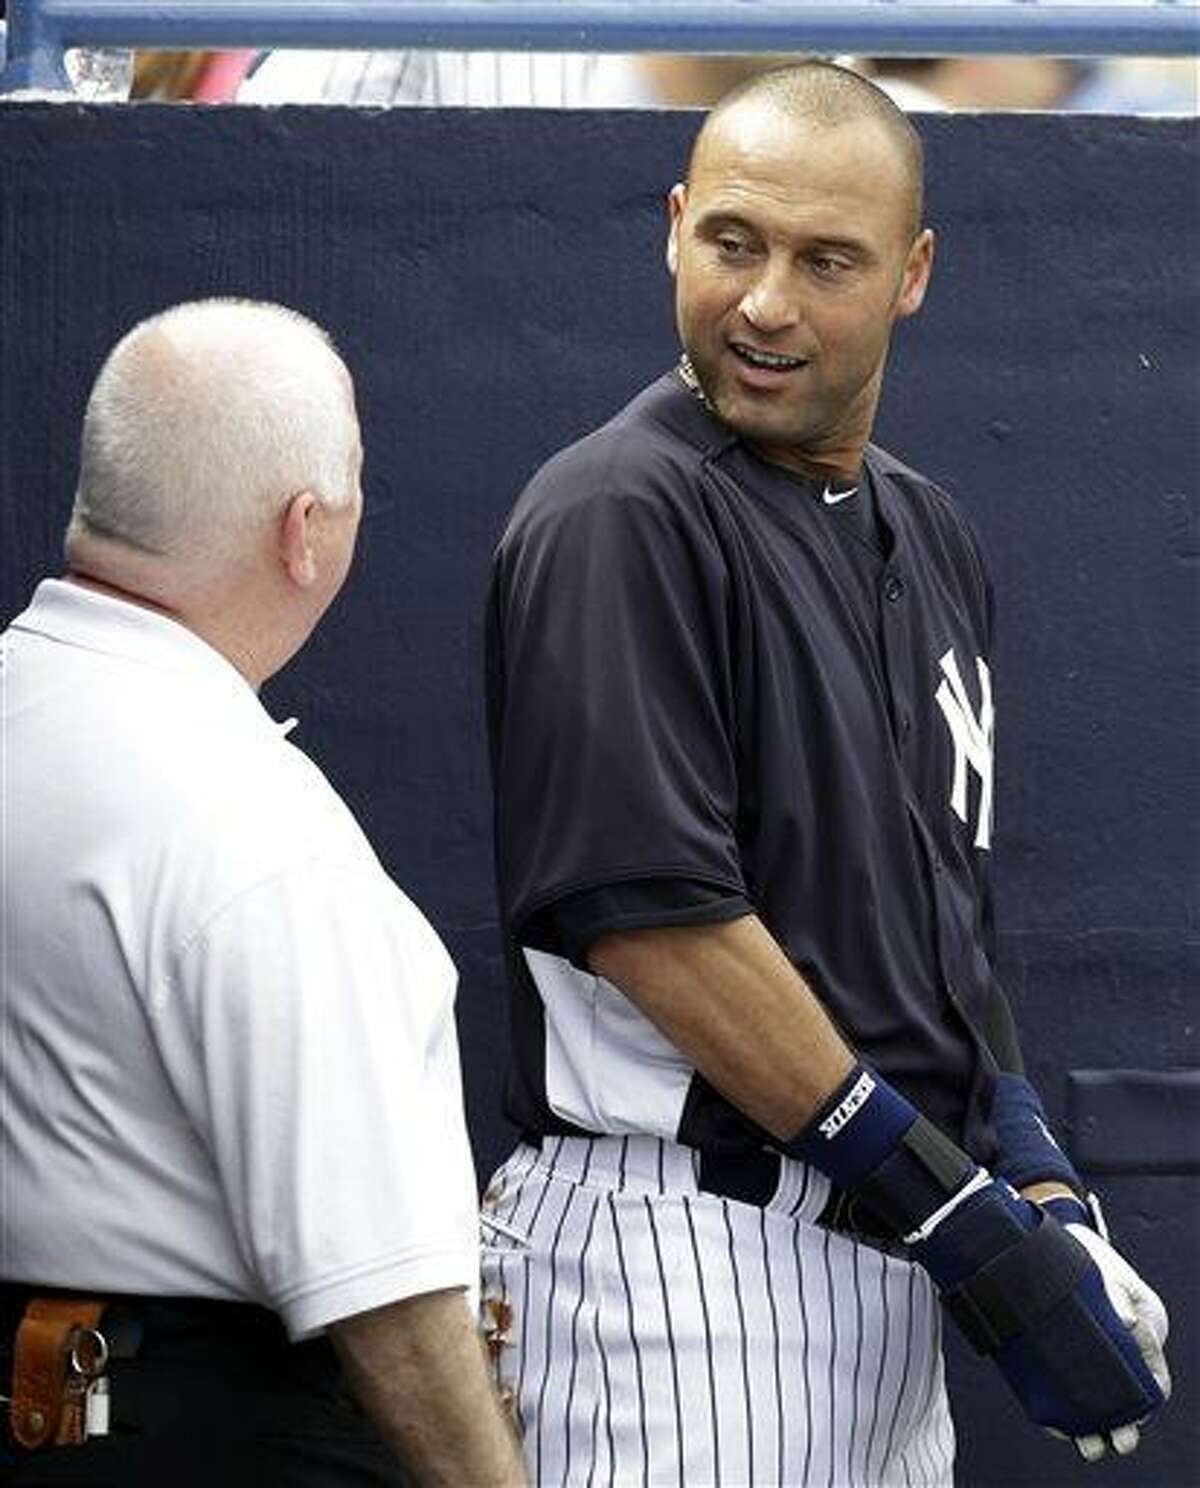 FILE - In this March 9, 2013, file photo, New York Yankees shortstop Derek Jeter talks with trainer Steve Donohue after batting as the designated hitter in a spring training baseball game against the Altanta Braves in Tampa, Fla. The Yankees said Thursday, April 18, 2013, that Jeter will be sidelined until after the All-Star break because of a new fracture in his injured left ankle. (AP Photo/Kathy Willens, File)